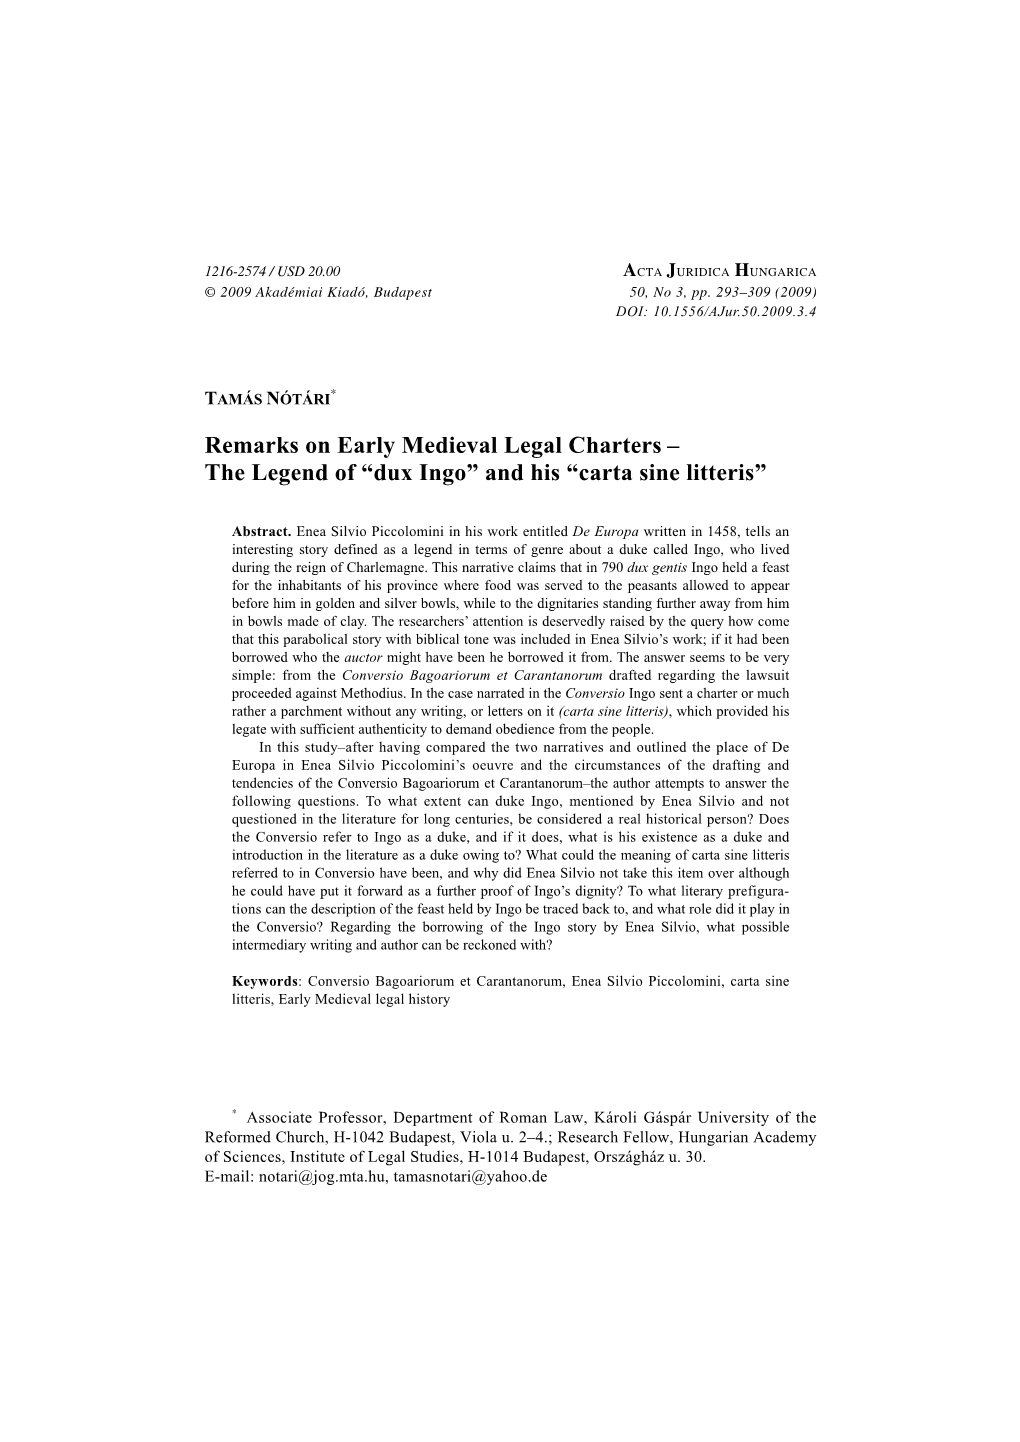 Remarks on Early Medieval Legal Charters &#X2014